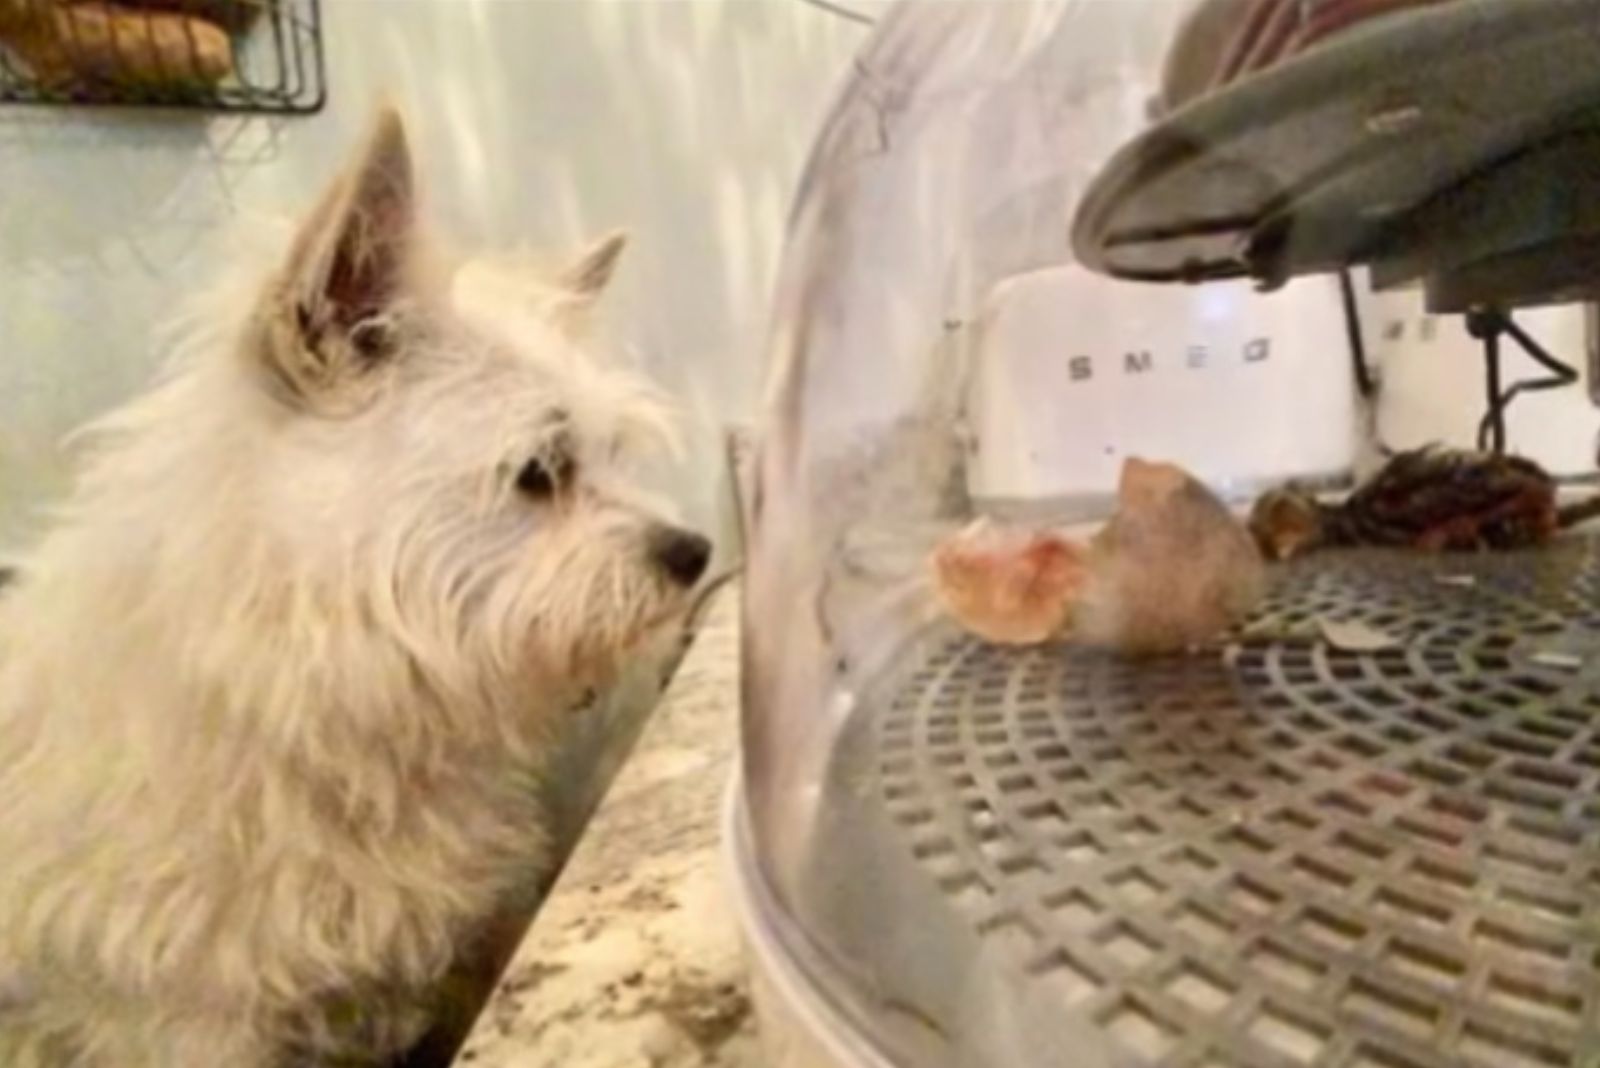 the dog watches the egg hatch